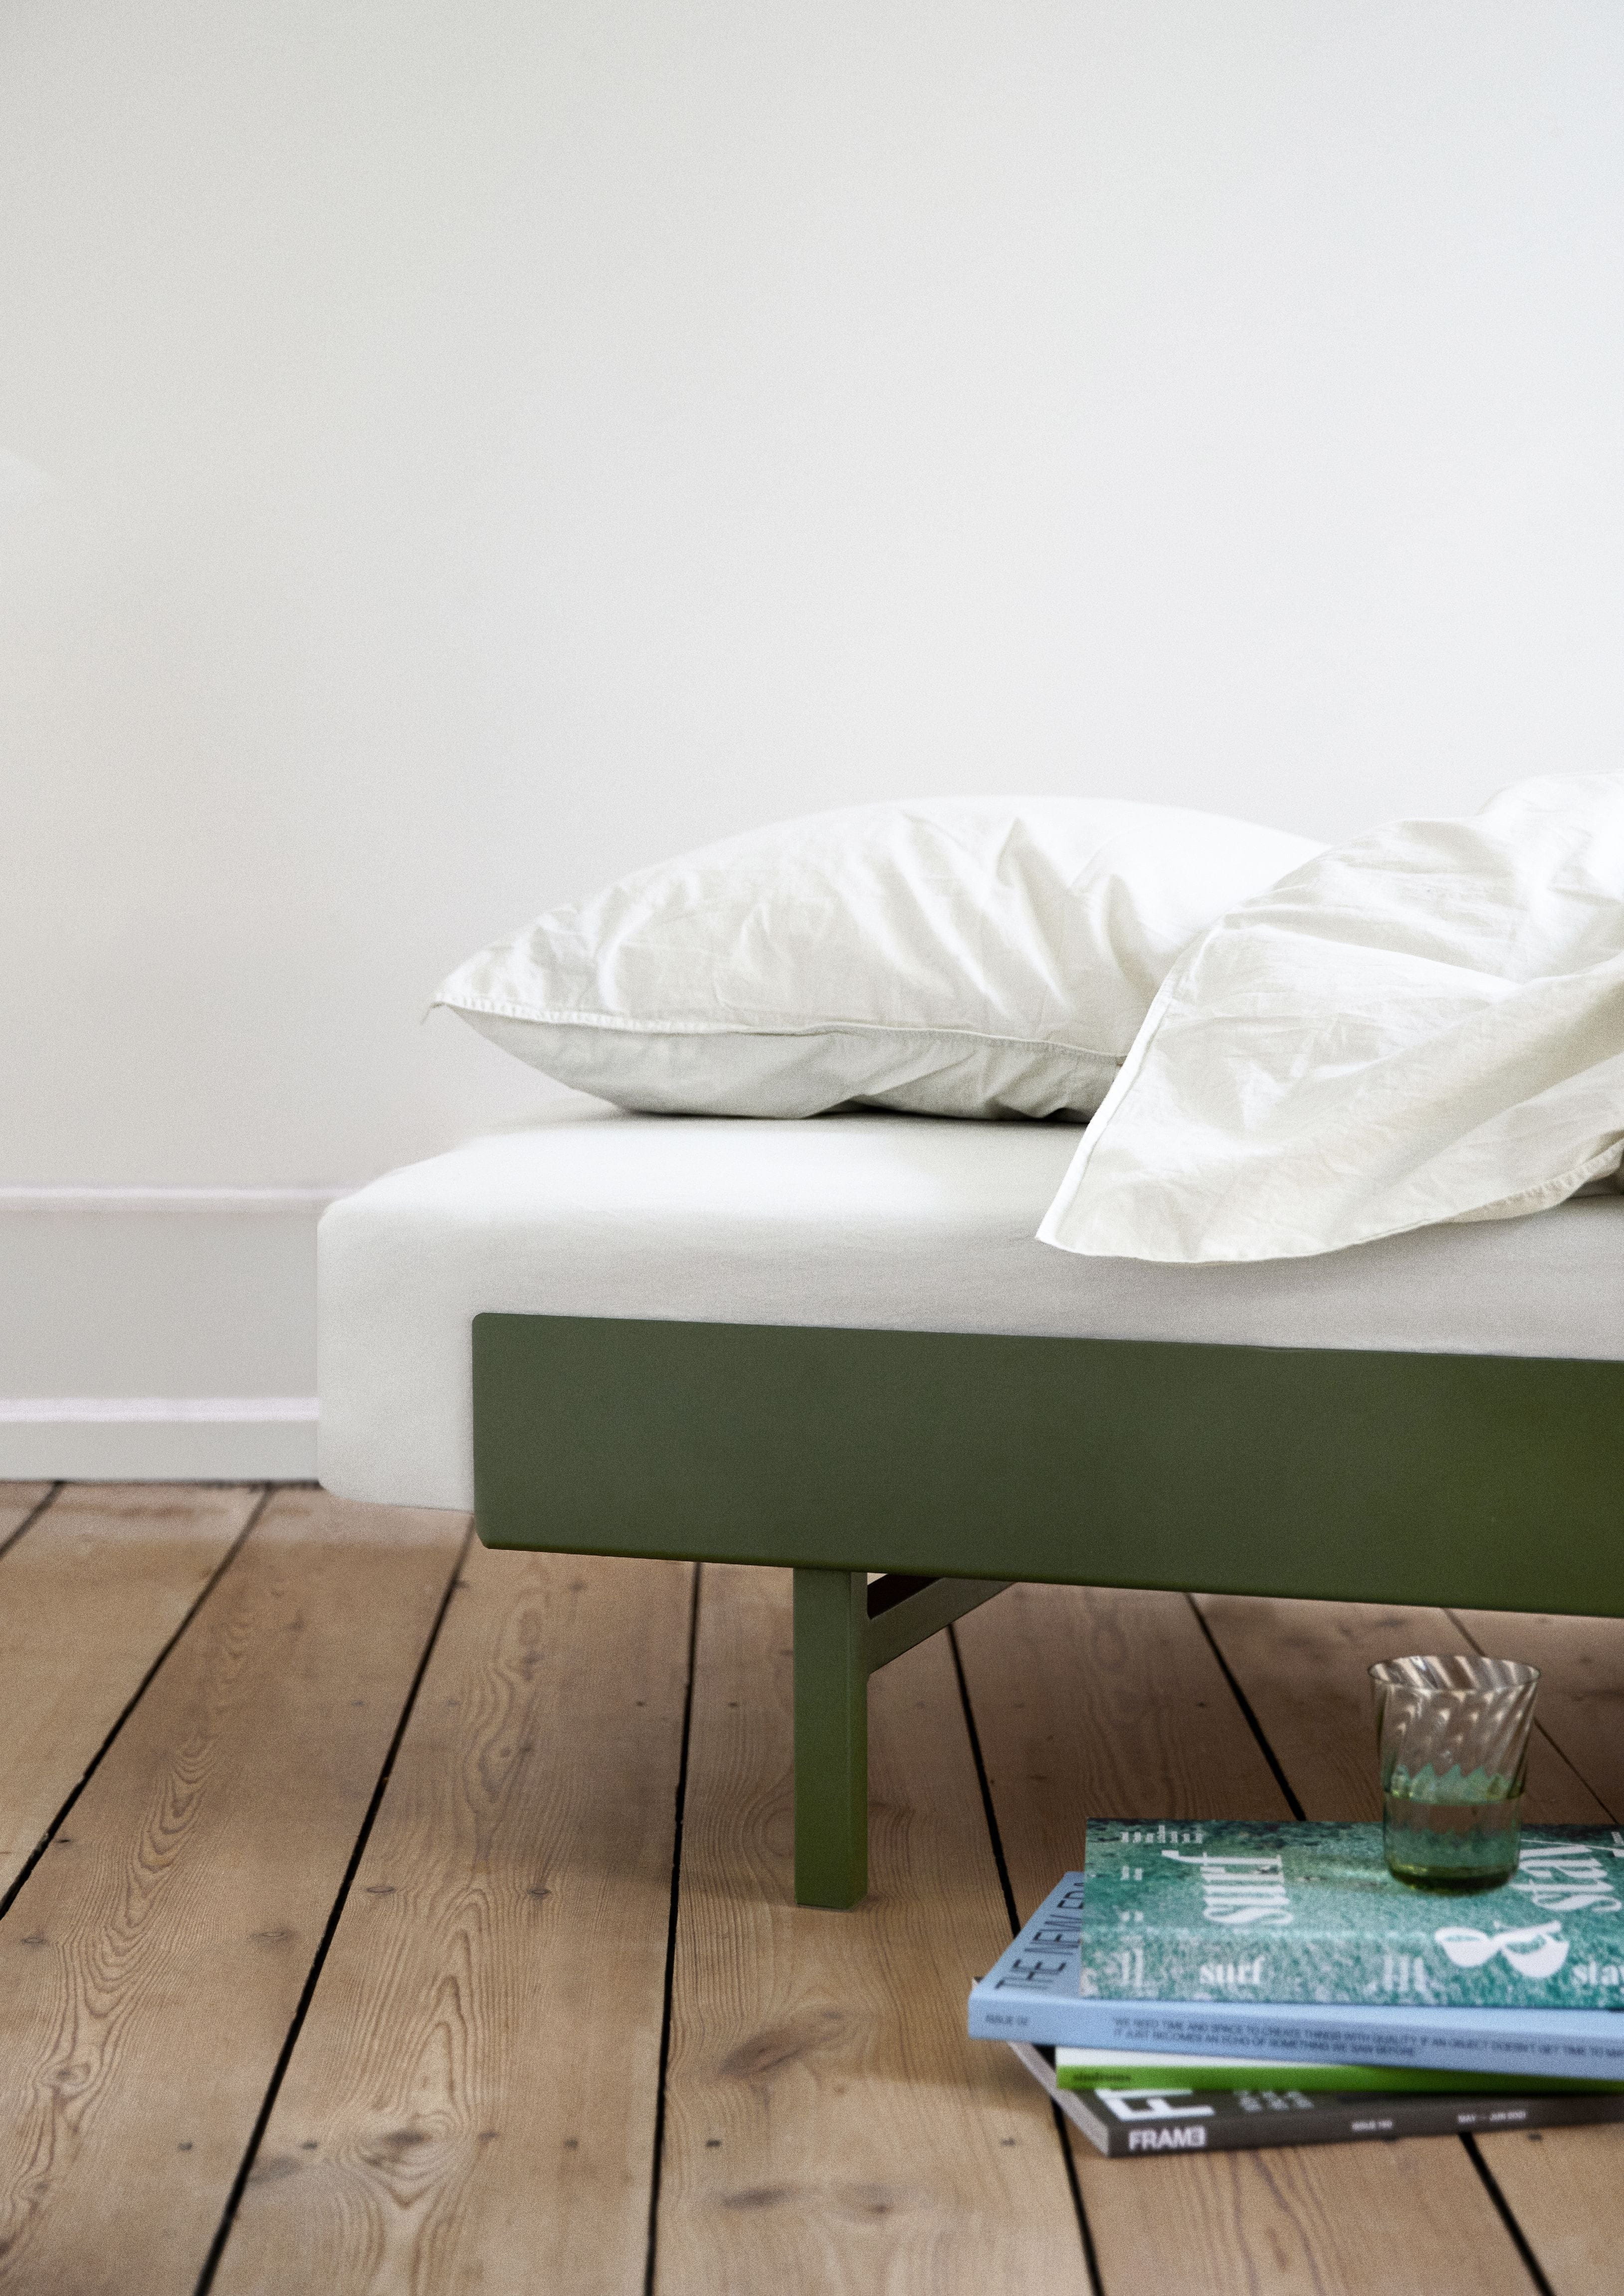 Moebe Bed With Bed Slats 90 Cm, Pine Green